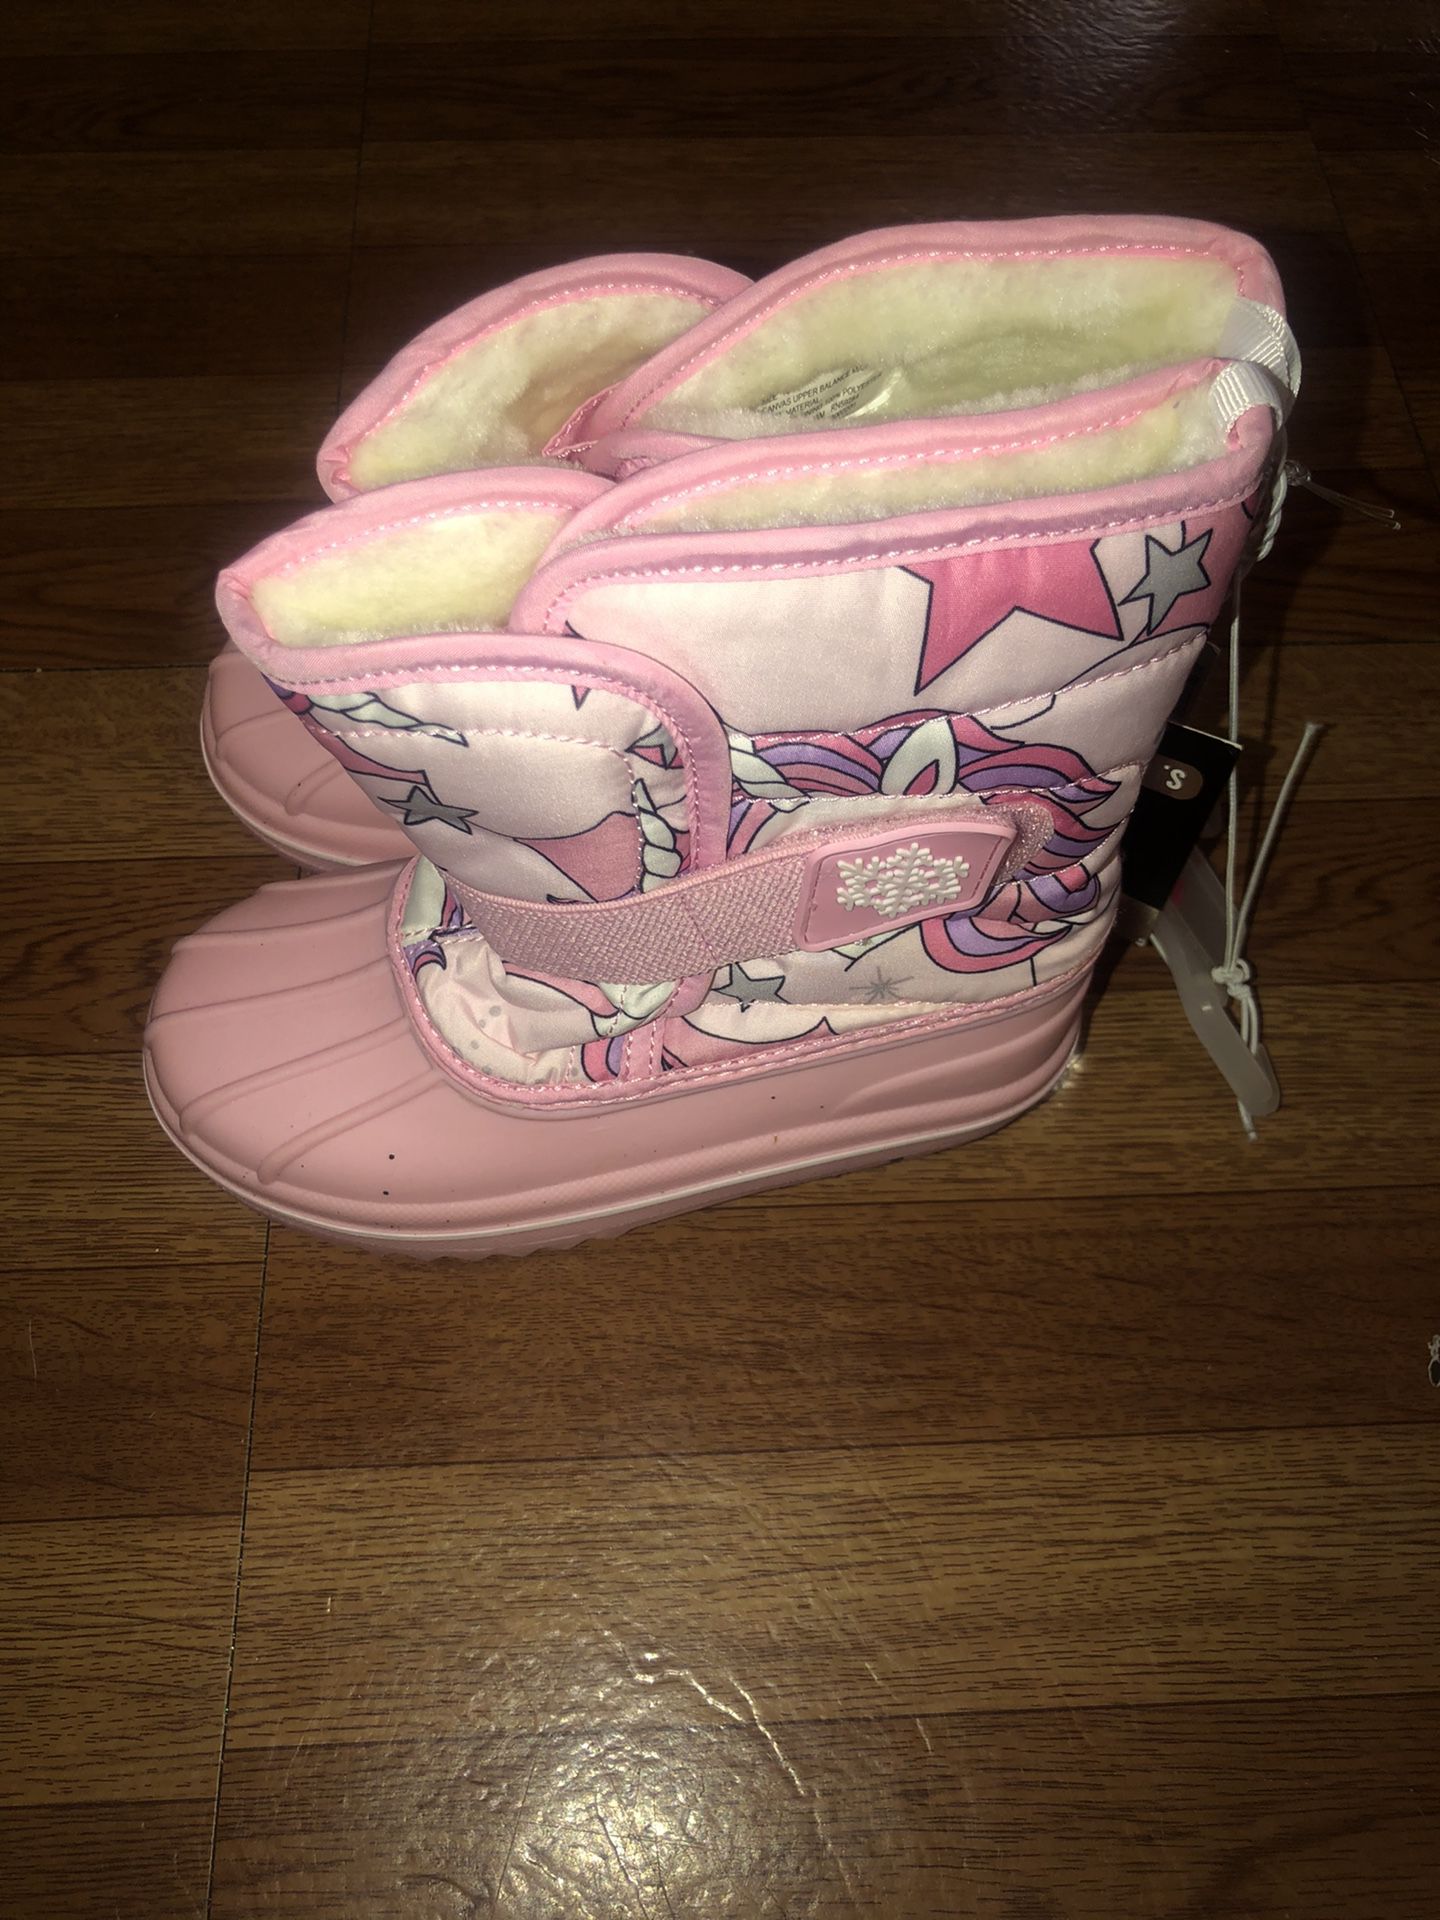 Children’s Place snow boots size 10 Brand New